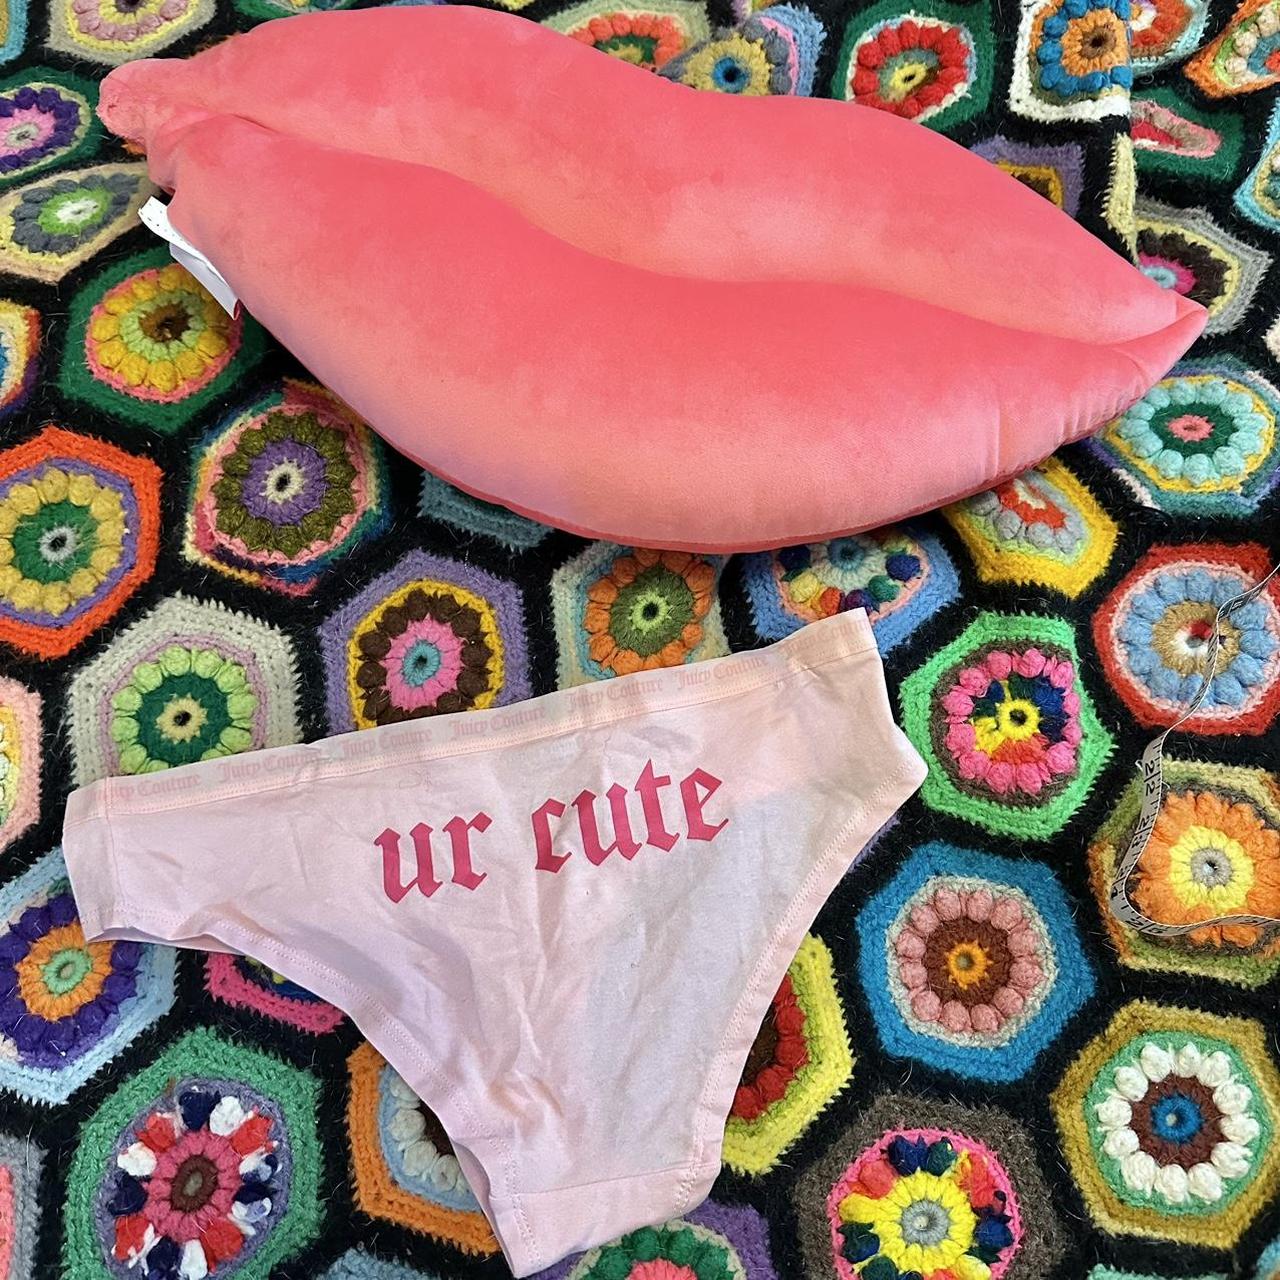 Juicy Couture Valentine’s Day collection lingerie